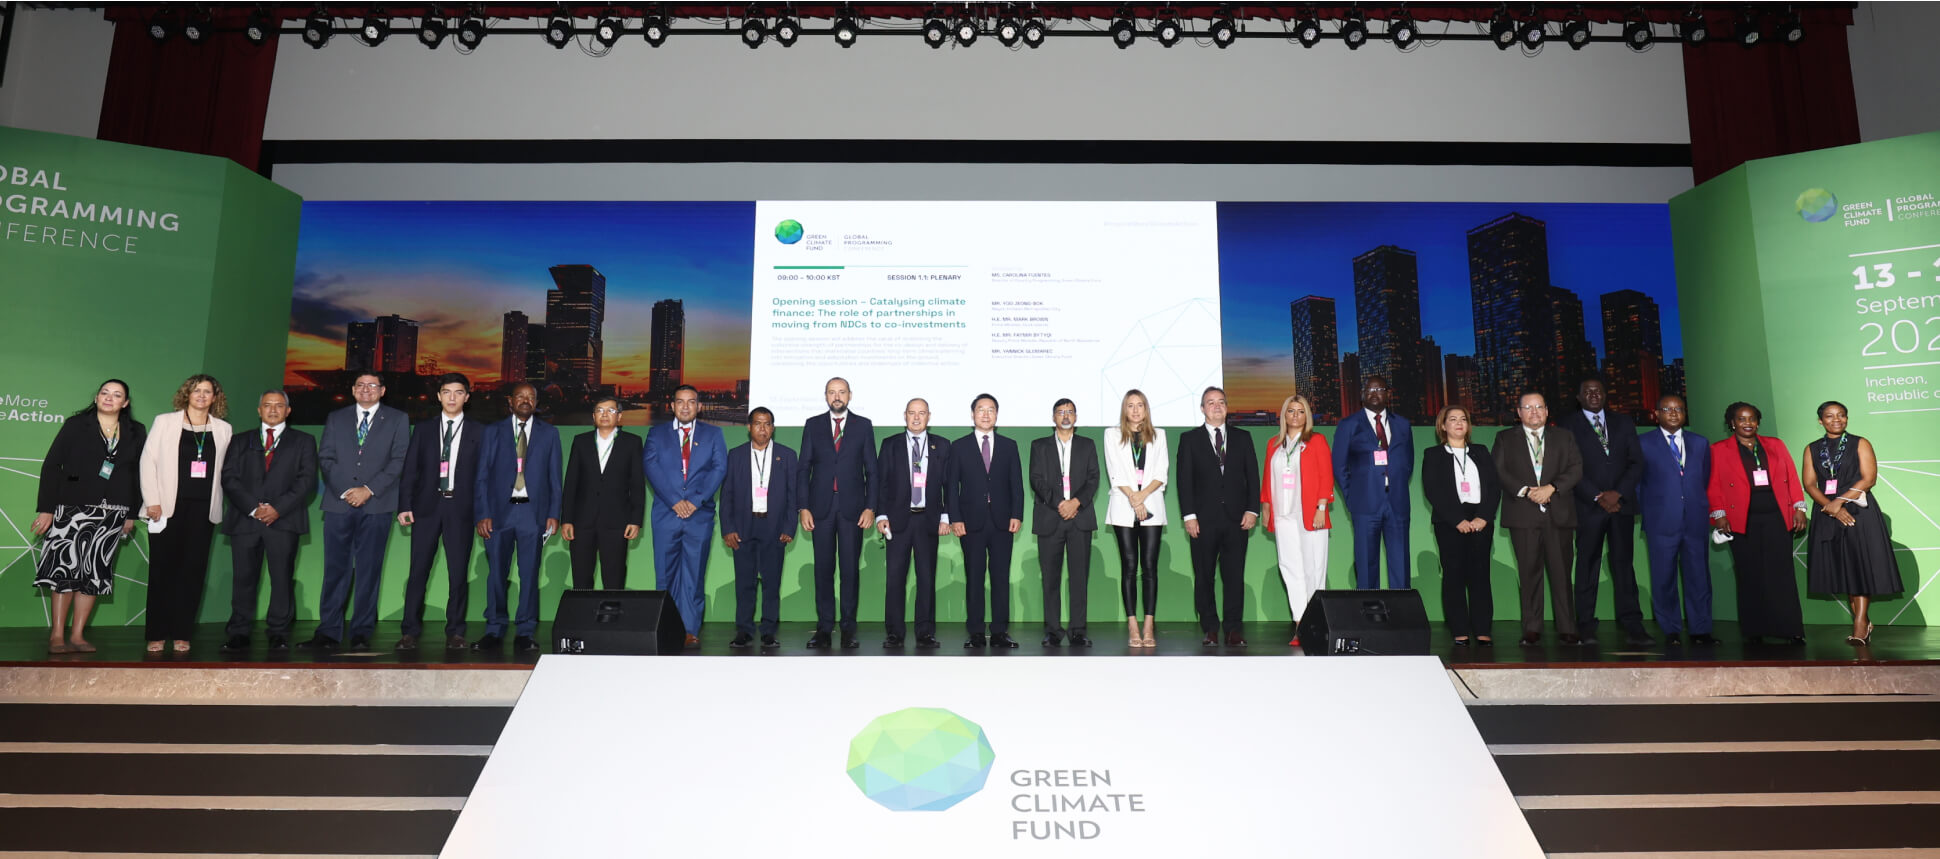 Developing country ministers and high-level officials at GCF Global Programming Conference (GPC) 2022. Photo: Dotplanner/GCF